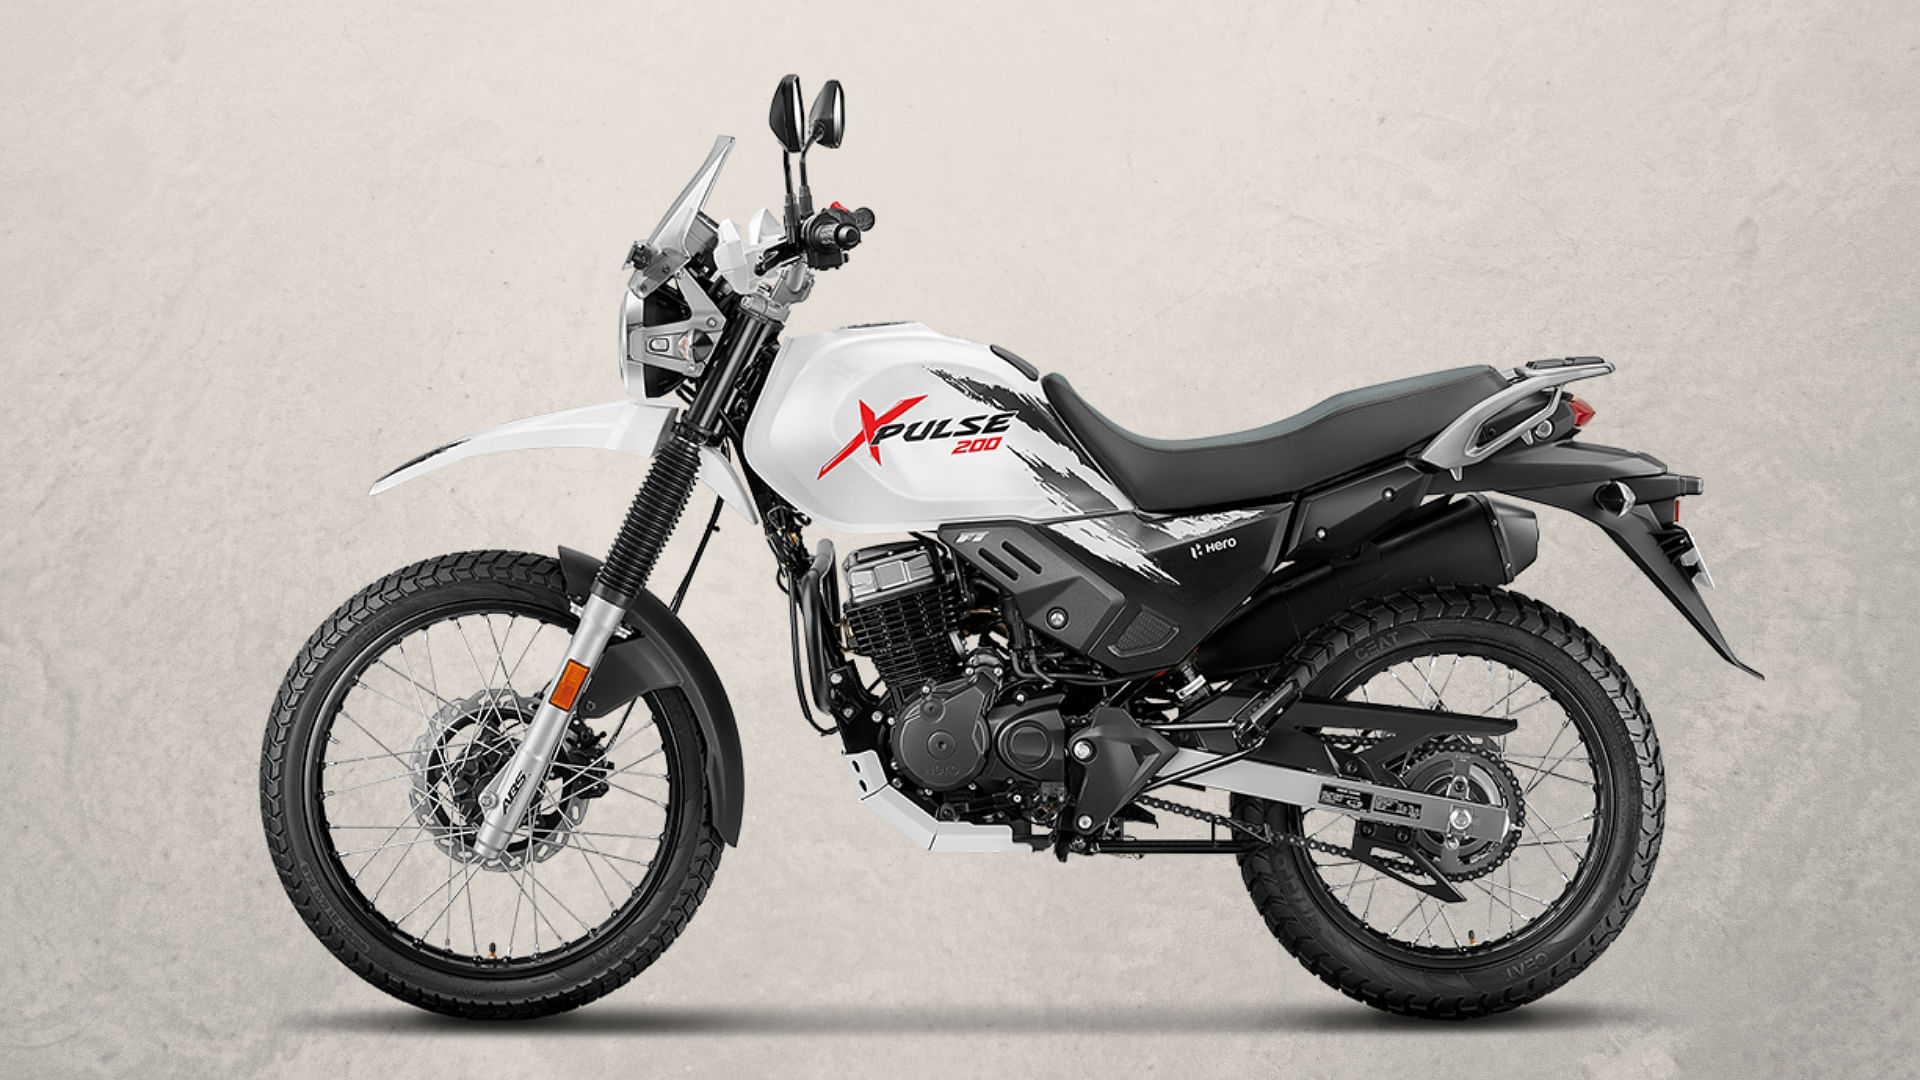 Best 200cc Bikes in India in 2019: List of the Top 200cc Motorcycles